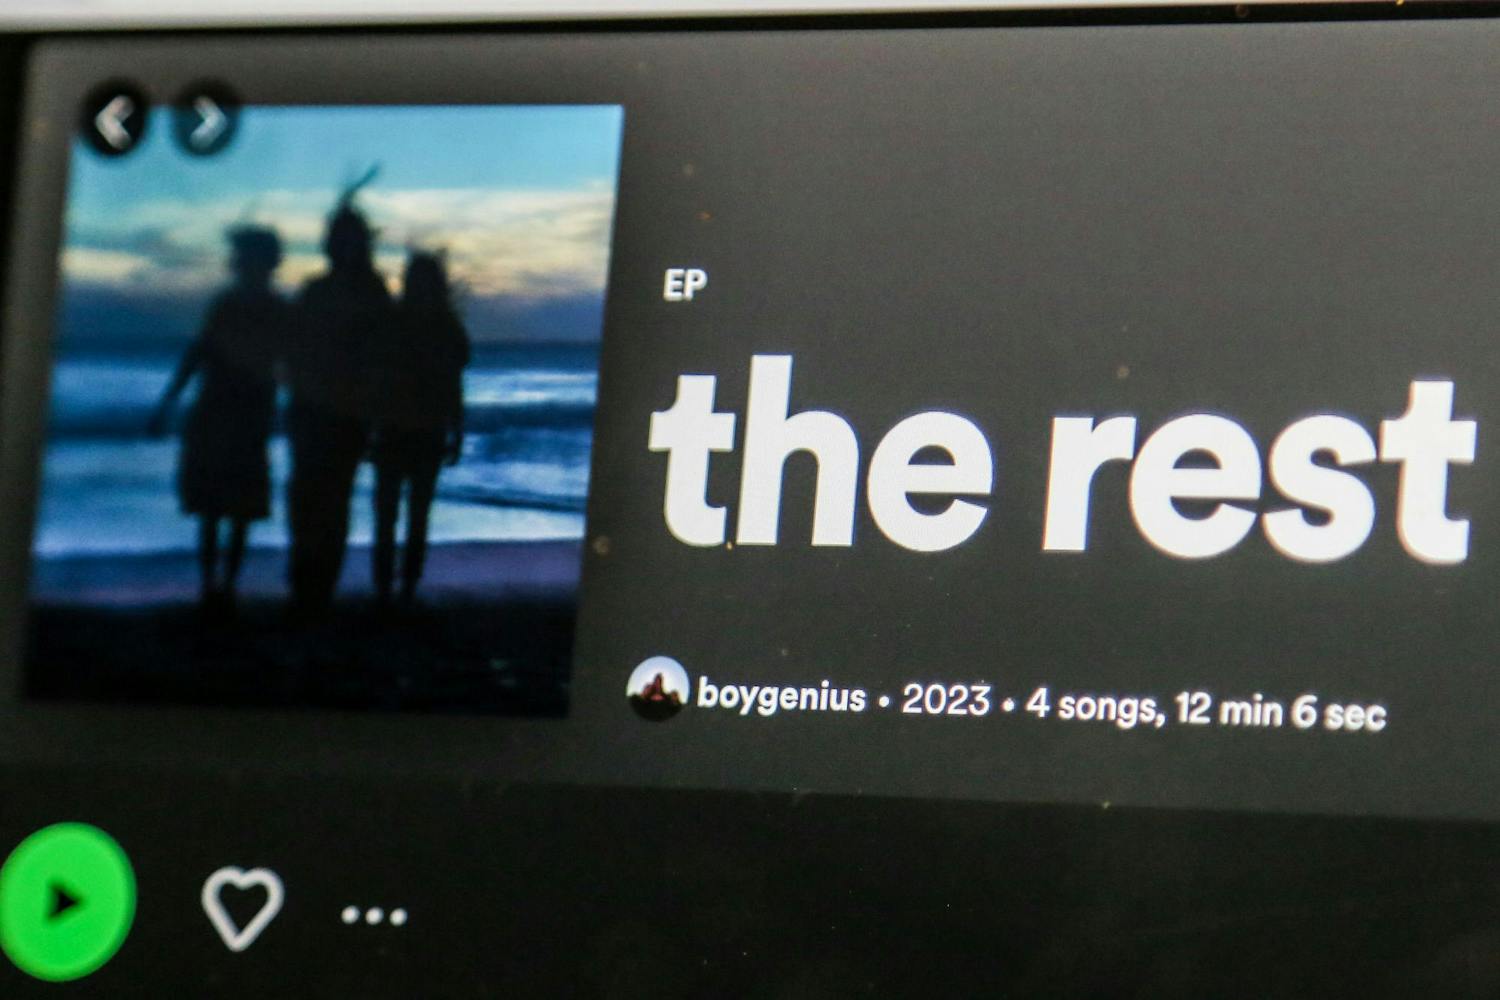 A photo illustration of a computer screen showing "the rest" — a new EP by band boygenius on Oct. 17, 2023. "the rest" is the band's second EP and was released on Oct. 13, 2023.